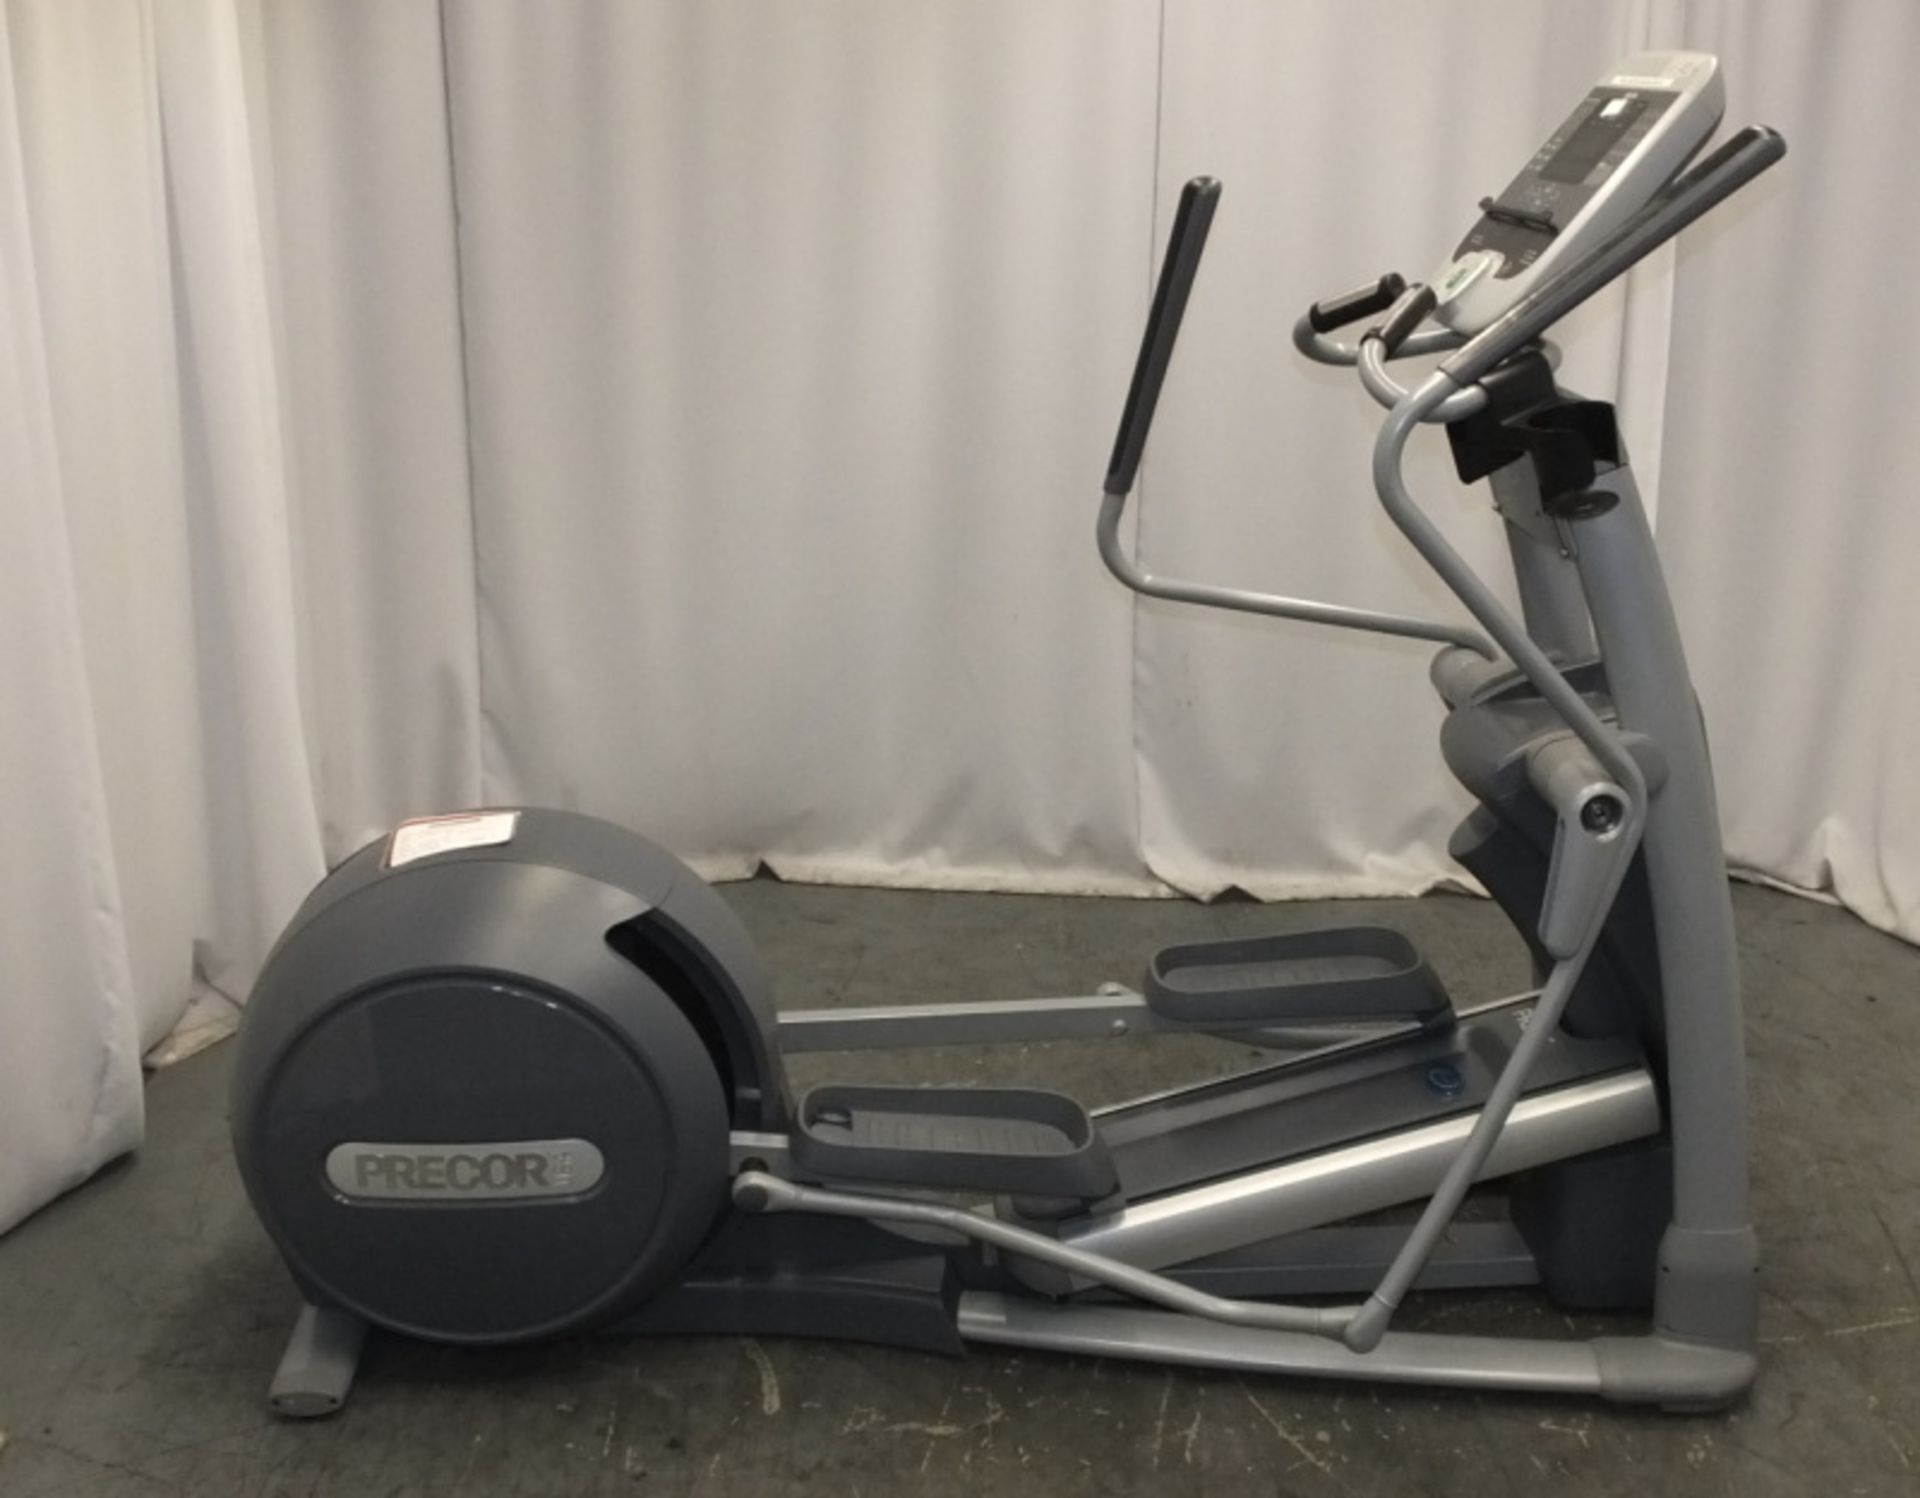 Precor EFX 576i Elliptical Cross Trainer - Left arm section loose, please see pictures for